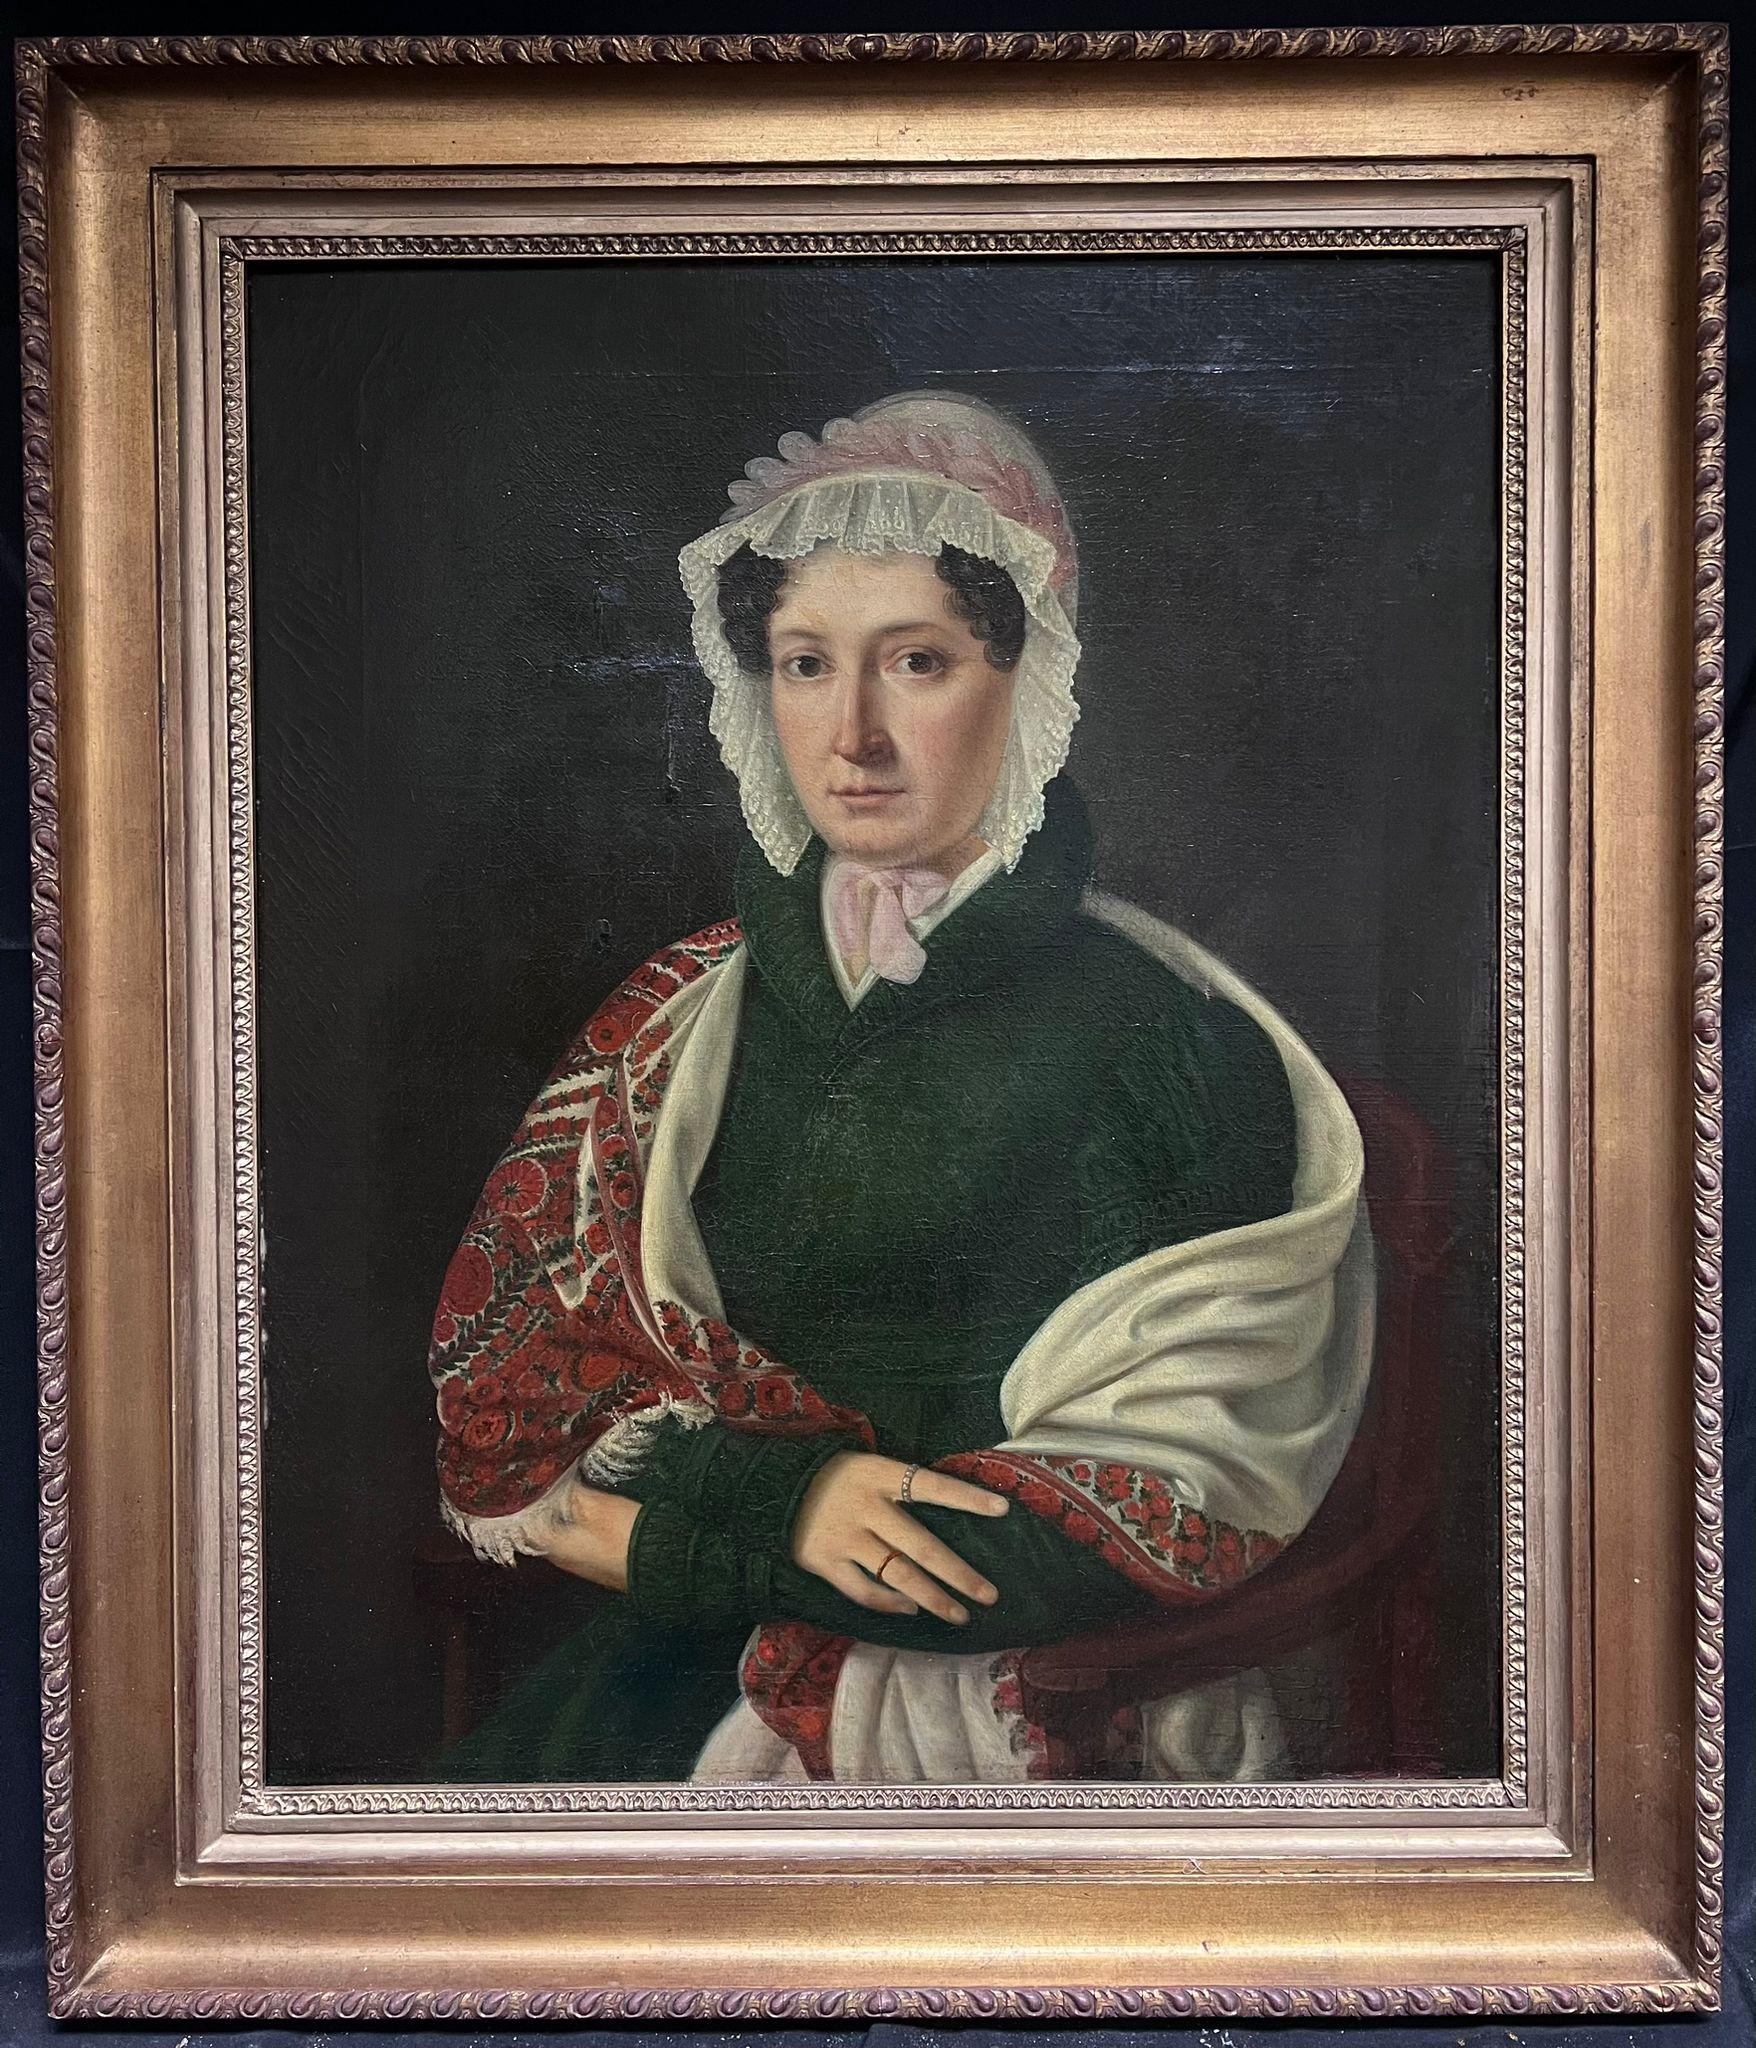 Portrait of a Lady in a Shawl
French artist, circa 1880's period
oil on canvas, framed
framed: 37 x 31.5 inches
canvas: 29.5 x 24 inches
provenance: private collection, France
condition: several repair patches evident verso and obvious repairs